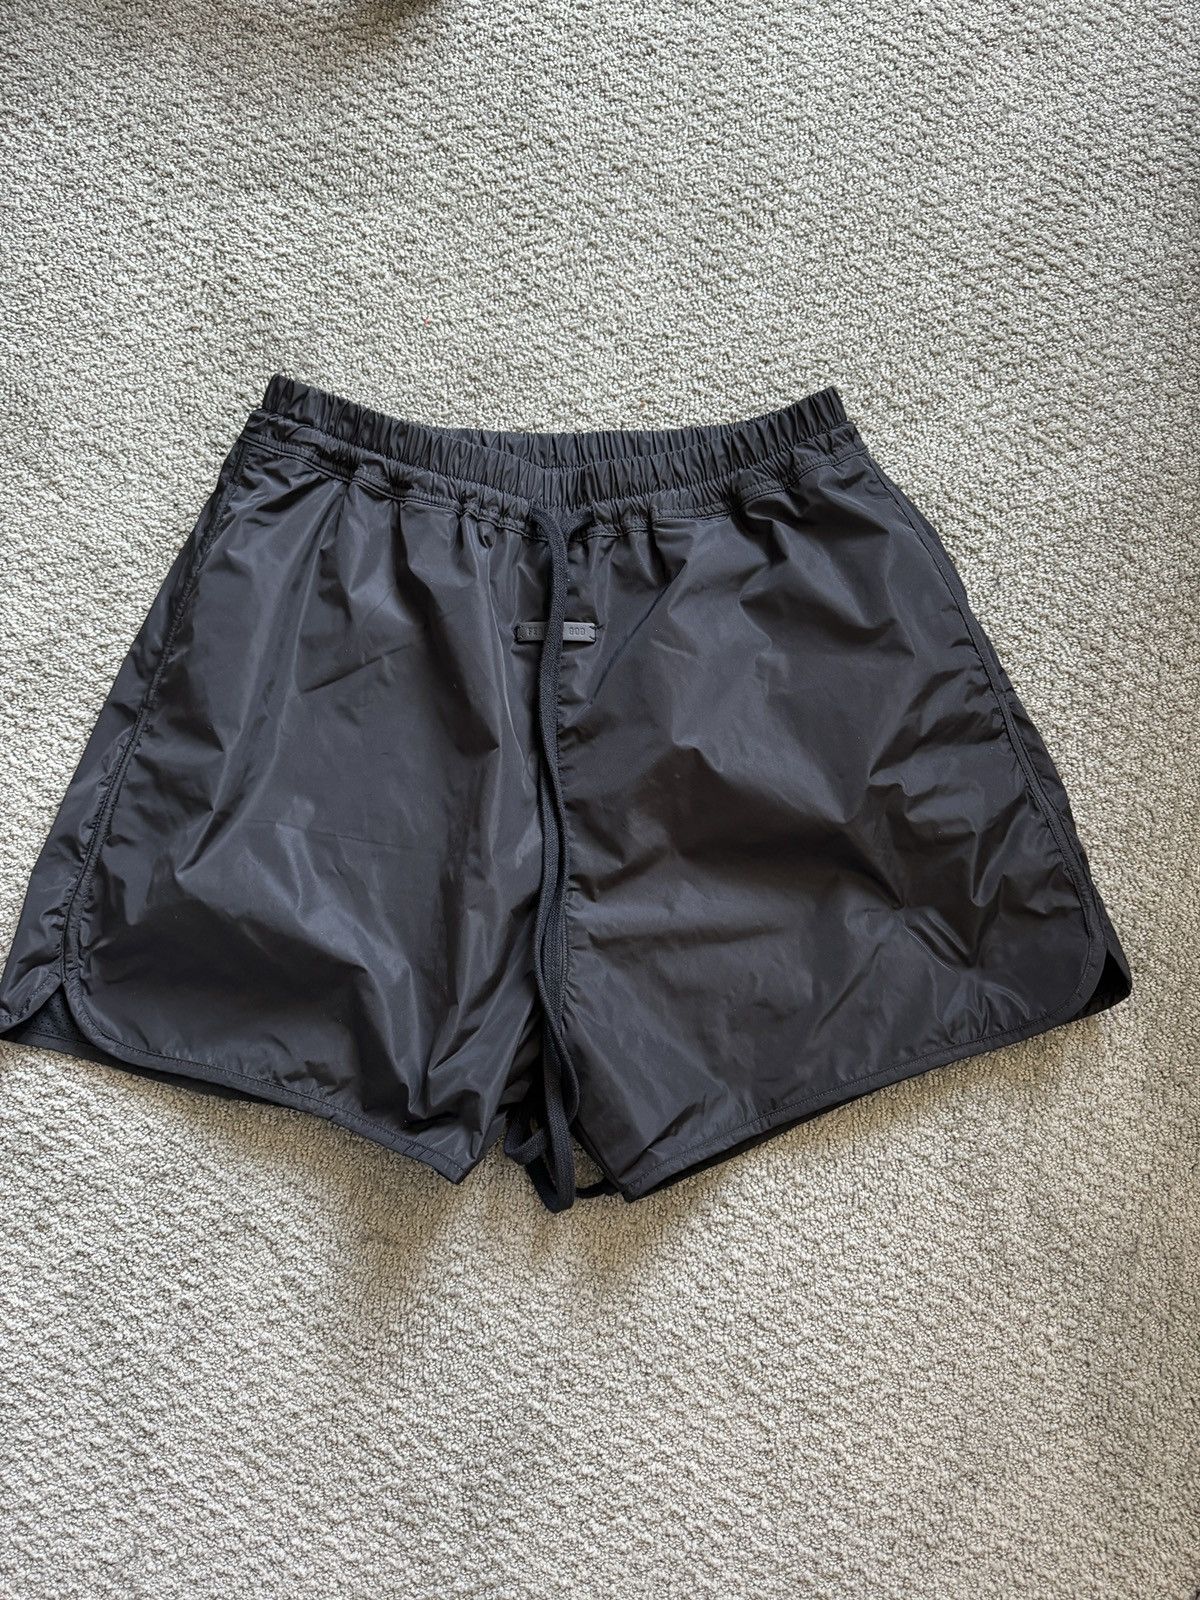 Fear of God Fear of God FOF 7th collection track shorts M | Grailed